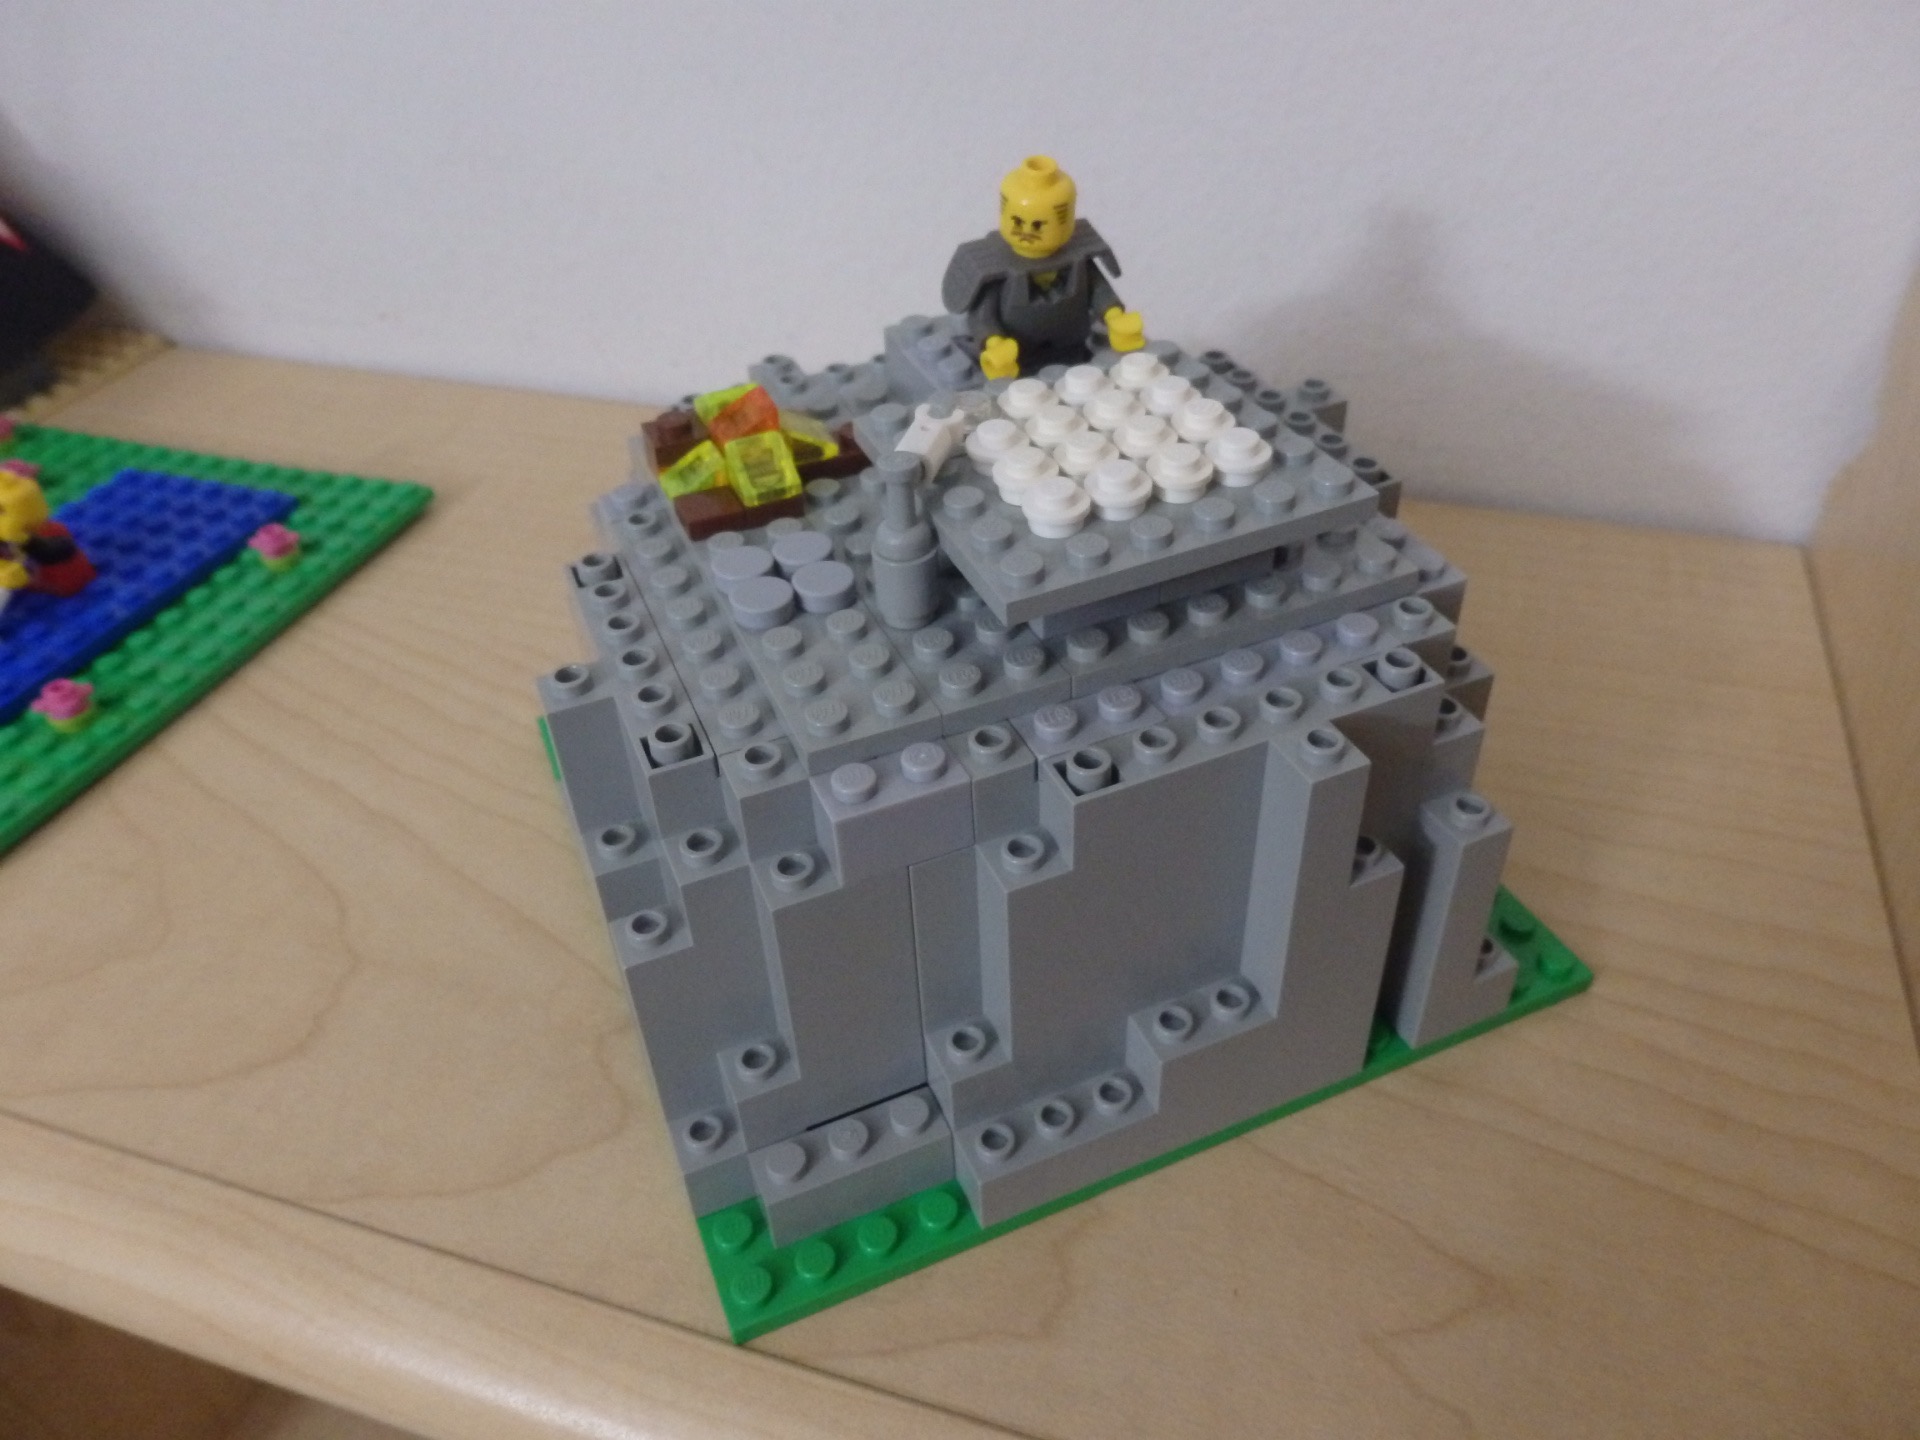 lego mountain with a flat top, man kneeling in front of an alter with 15 white round lego pieces, and 1 clear, with a white lego hand reaching for the clear stone